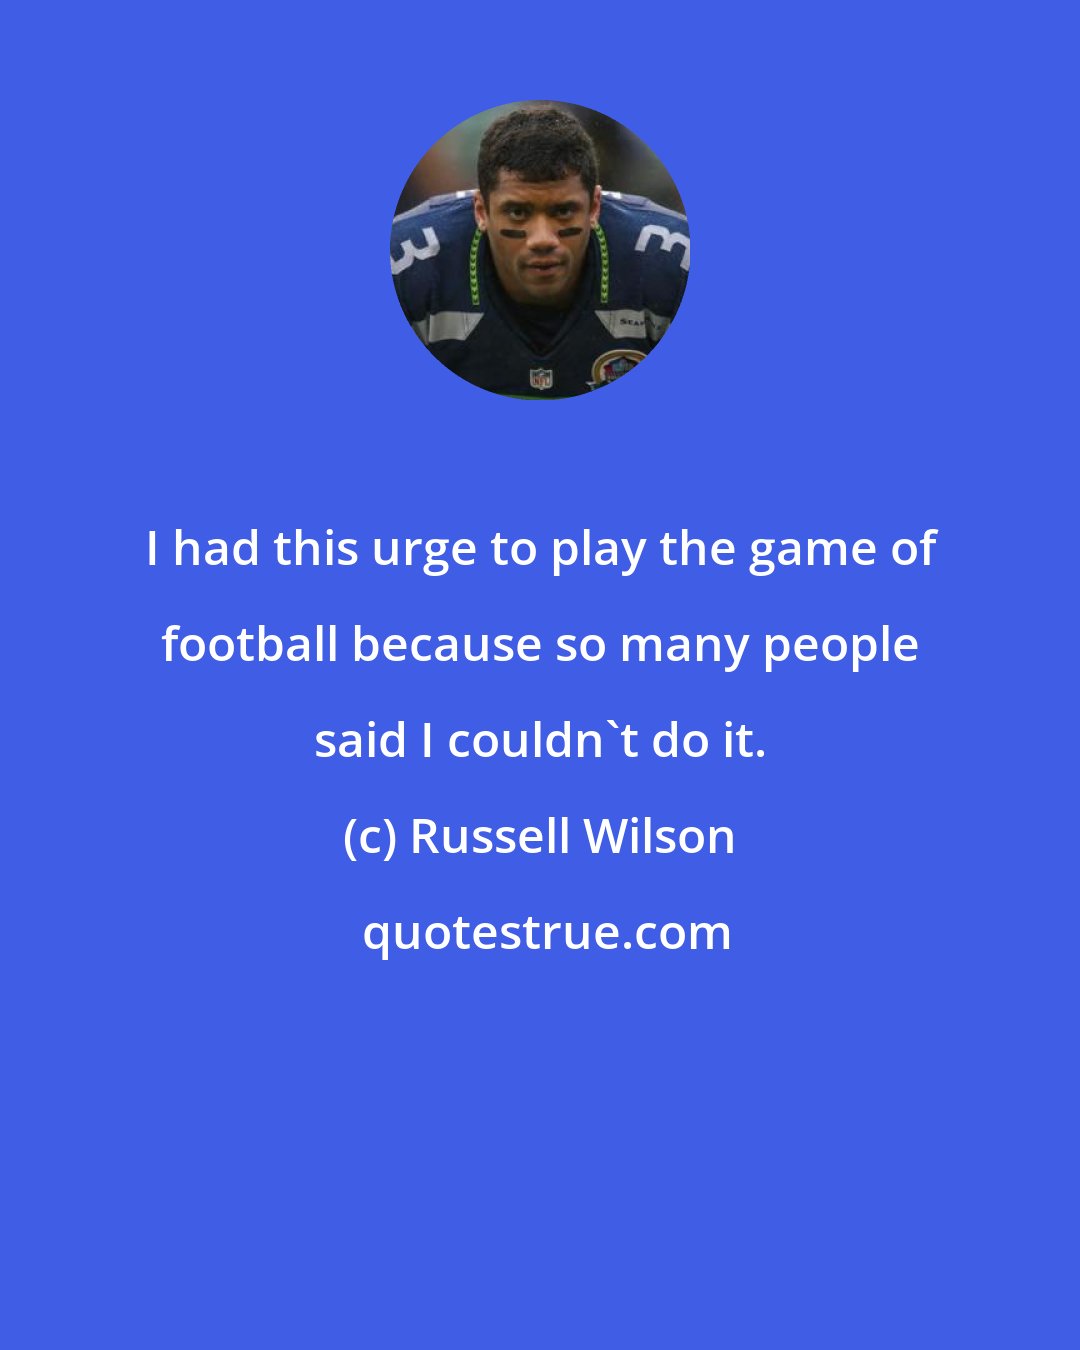 Russell Wilson: I had this urge to play the game of football because so many people said I couldn't do it.